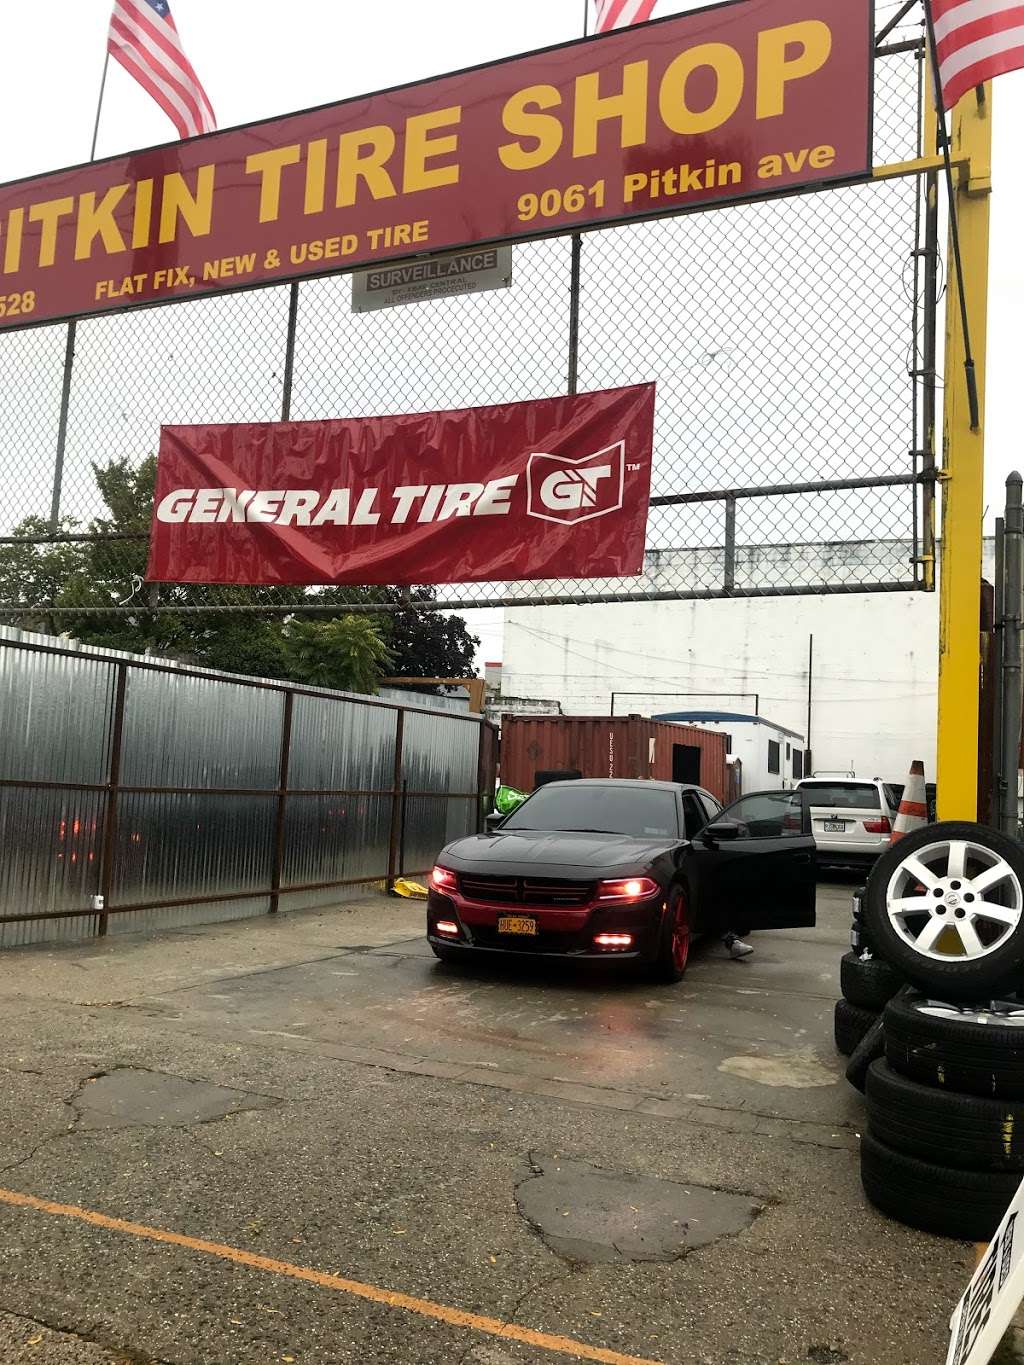 24 HOURS TIRE SHOP, FIX FLAT# PITKIN TIRE SHOP | 9061 Pitkin Ave, Ozone Park, NY 11417 | Phone: (718) 374-3610